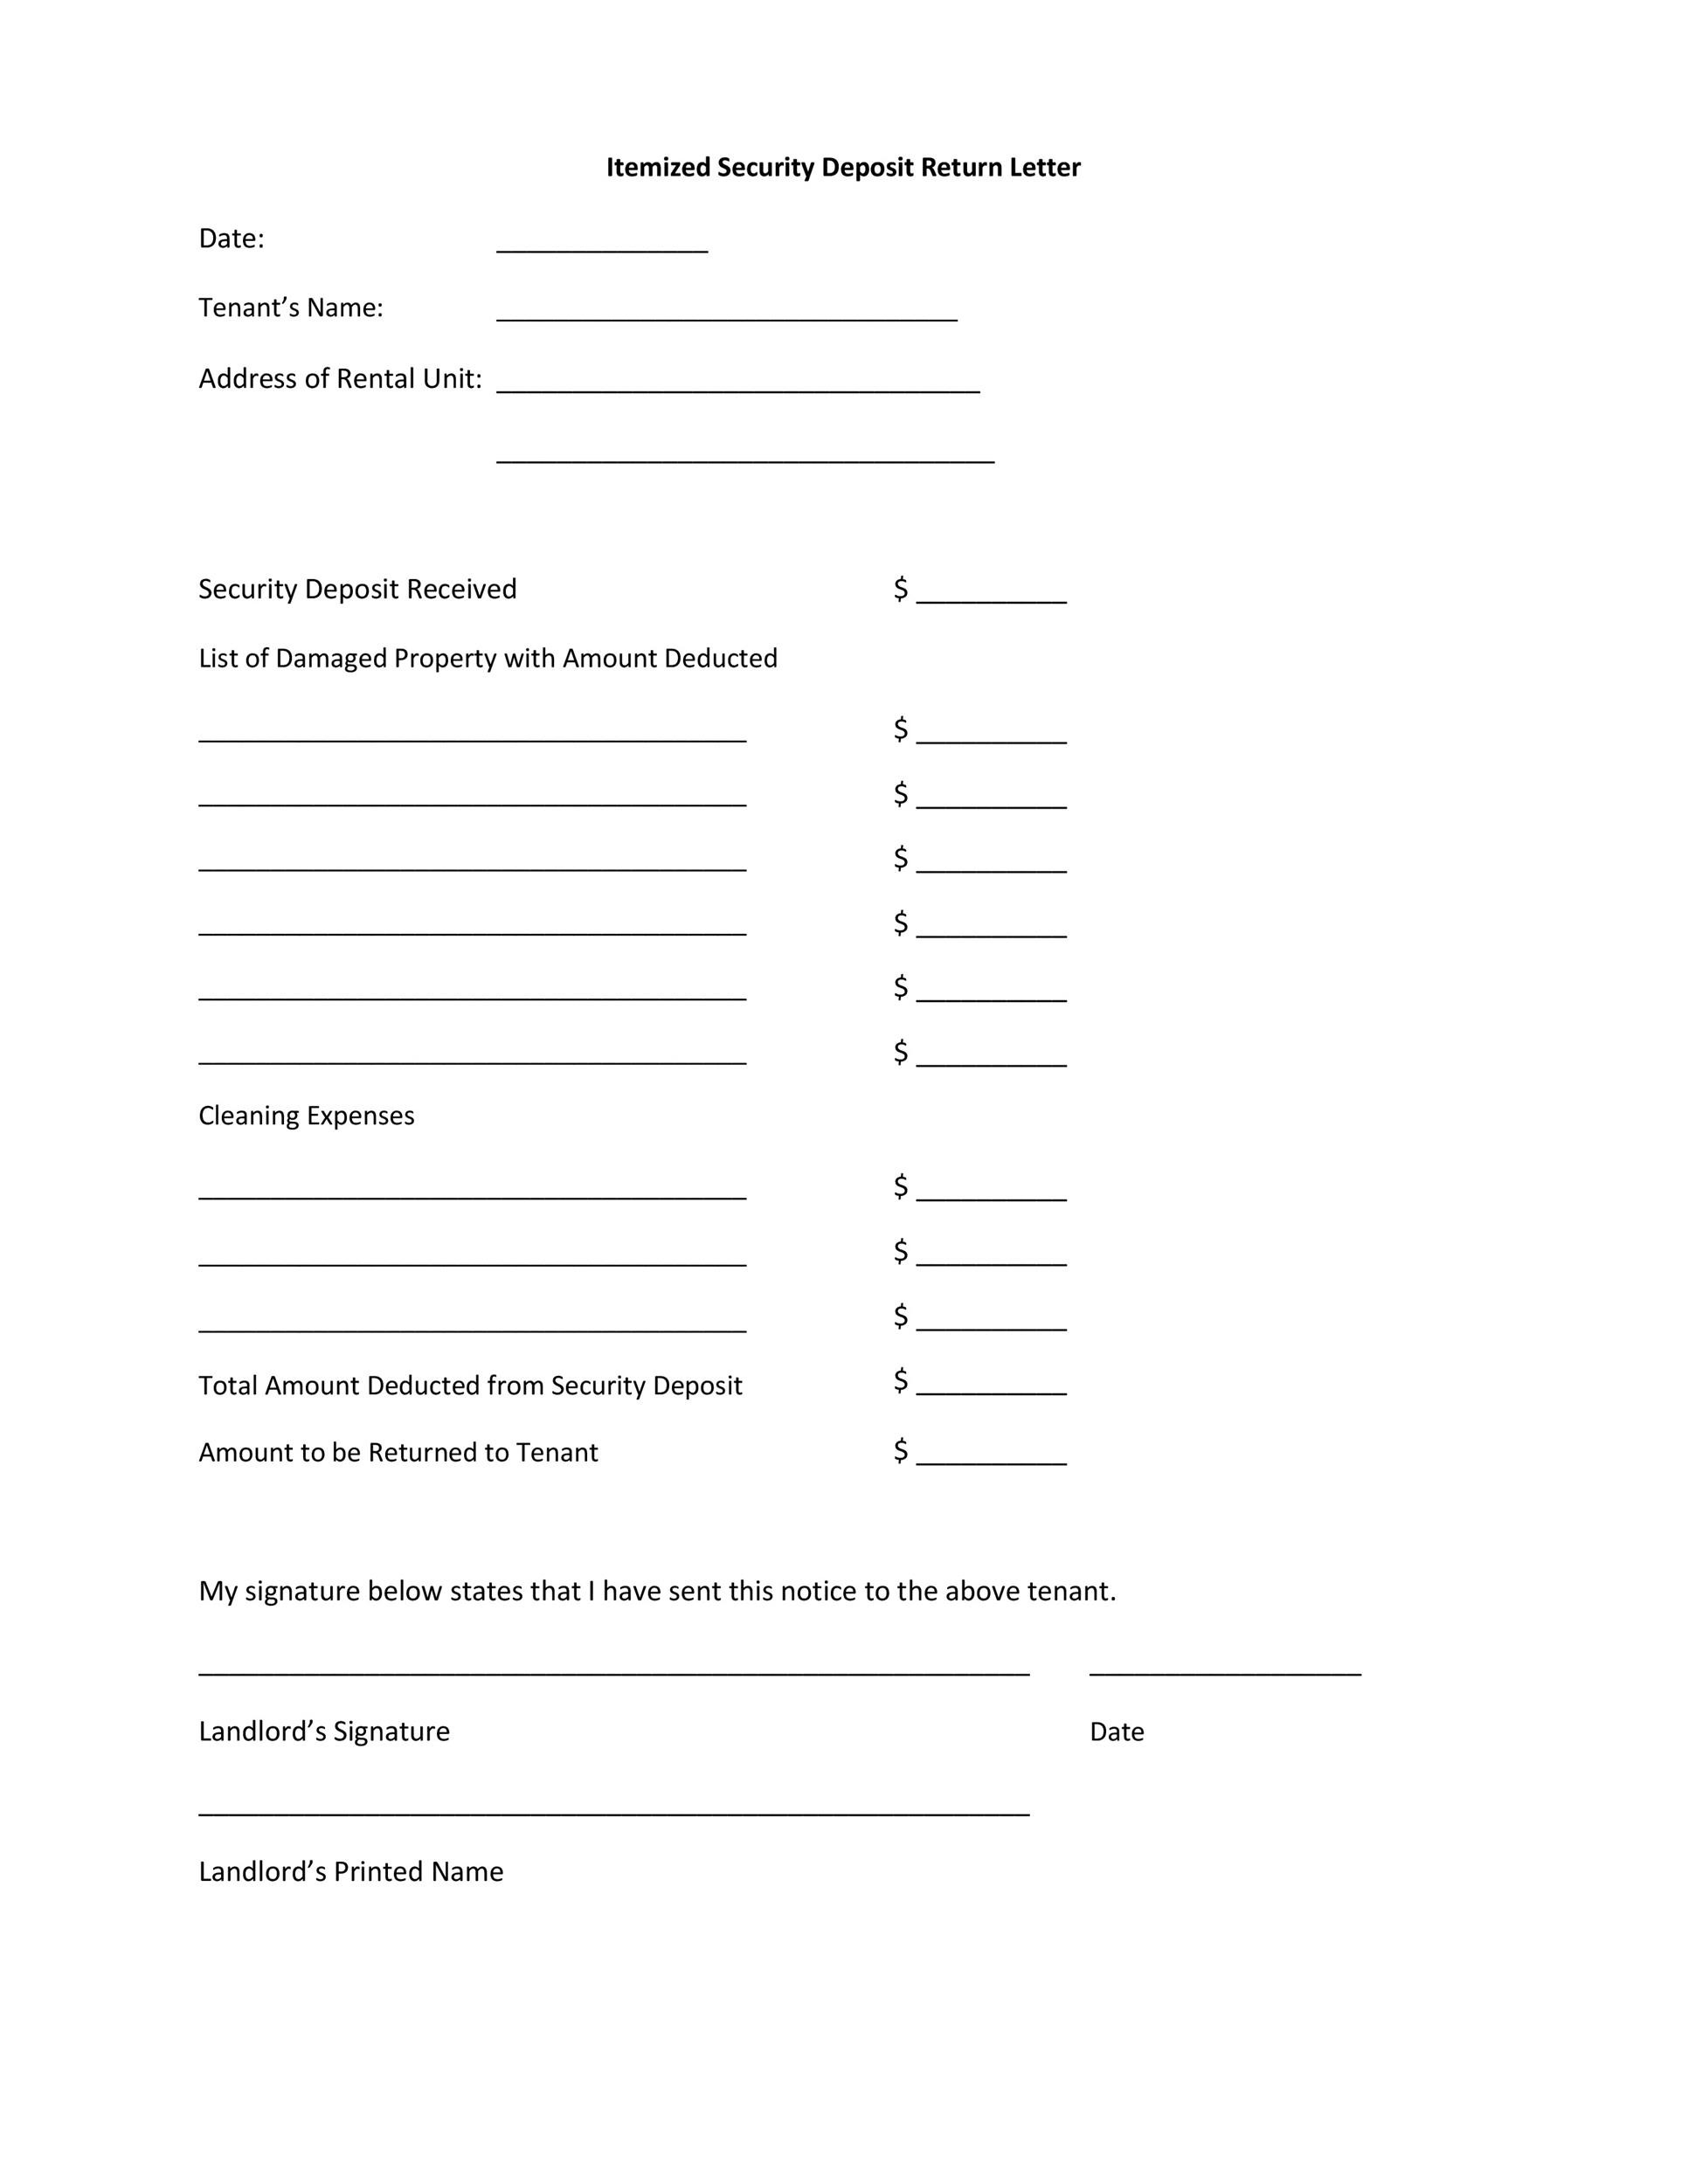 10 Effective Security Deposit Return Letters [MS Word] ᐅ TemplateLab Pertaining To Landlord Security Deposit Return Form Intended For Landlord Security Deposit Return Form